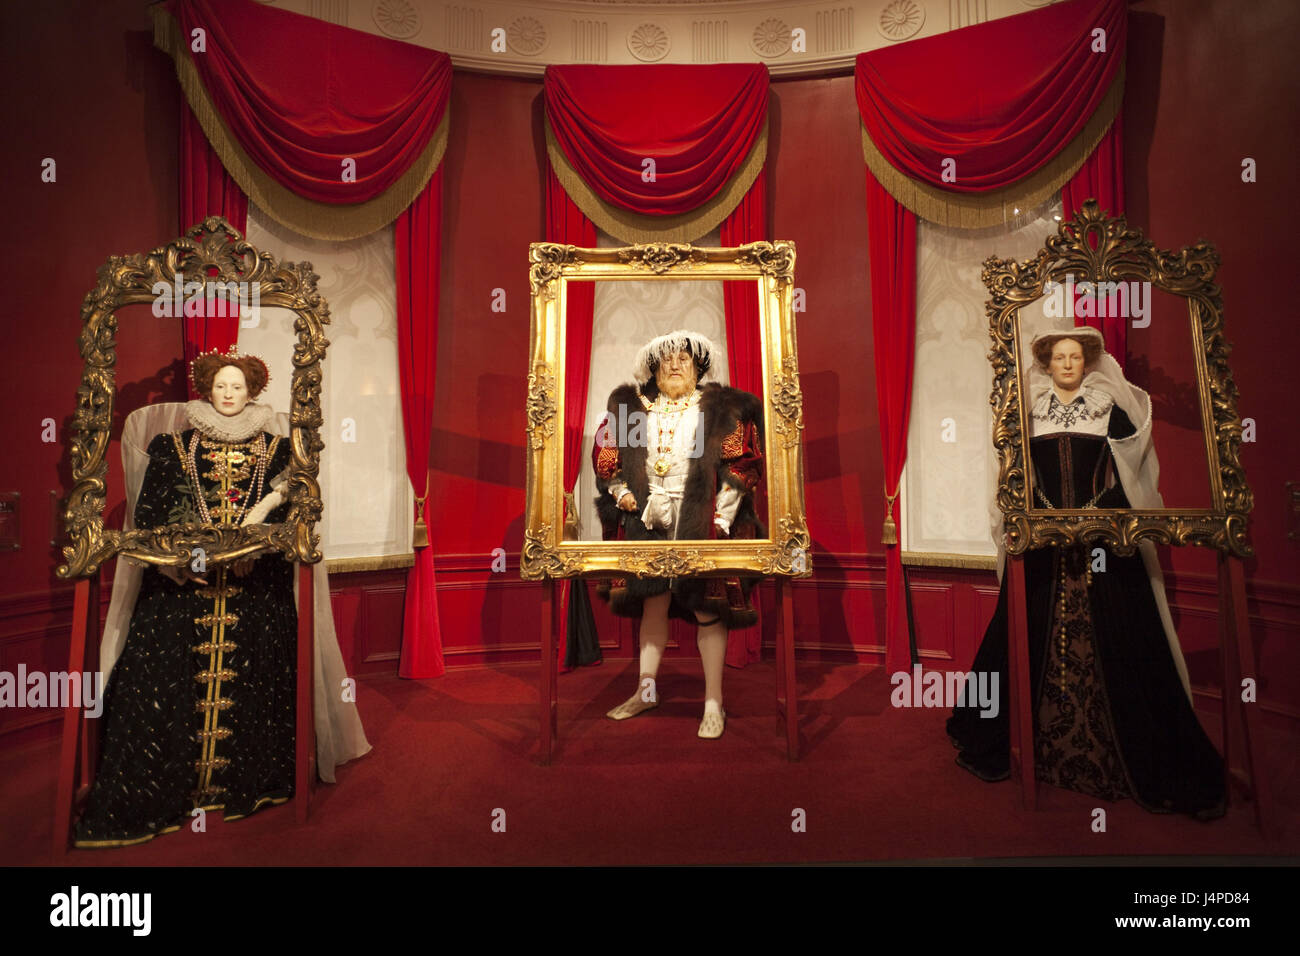 Great Britain, England, London, Madame Tussaud's, wax character's cabinet, Stock Photo